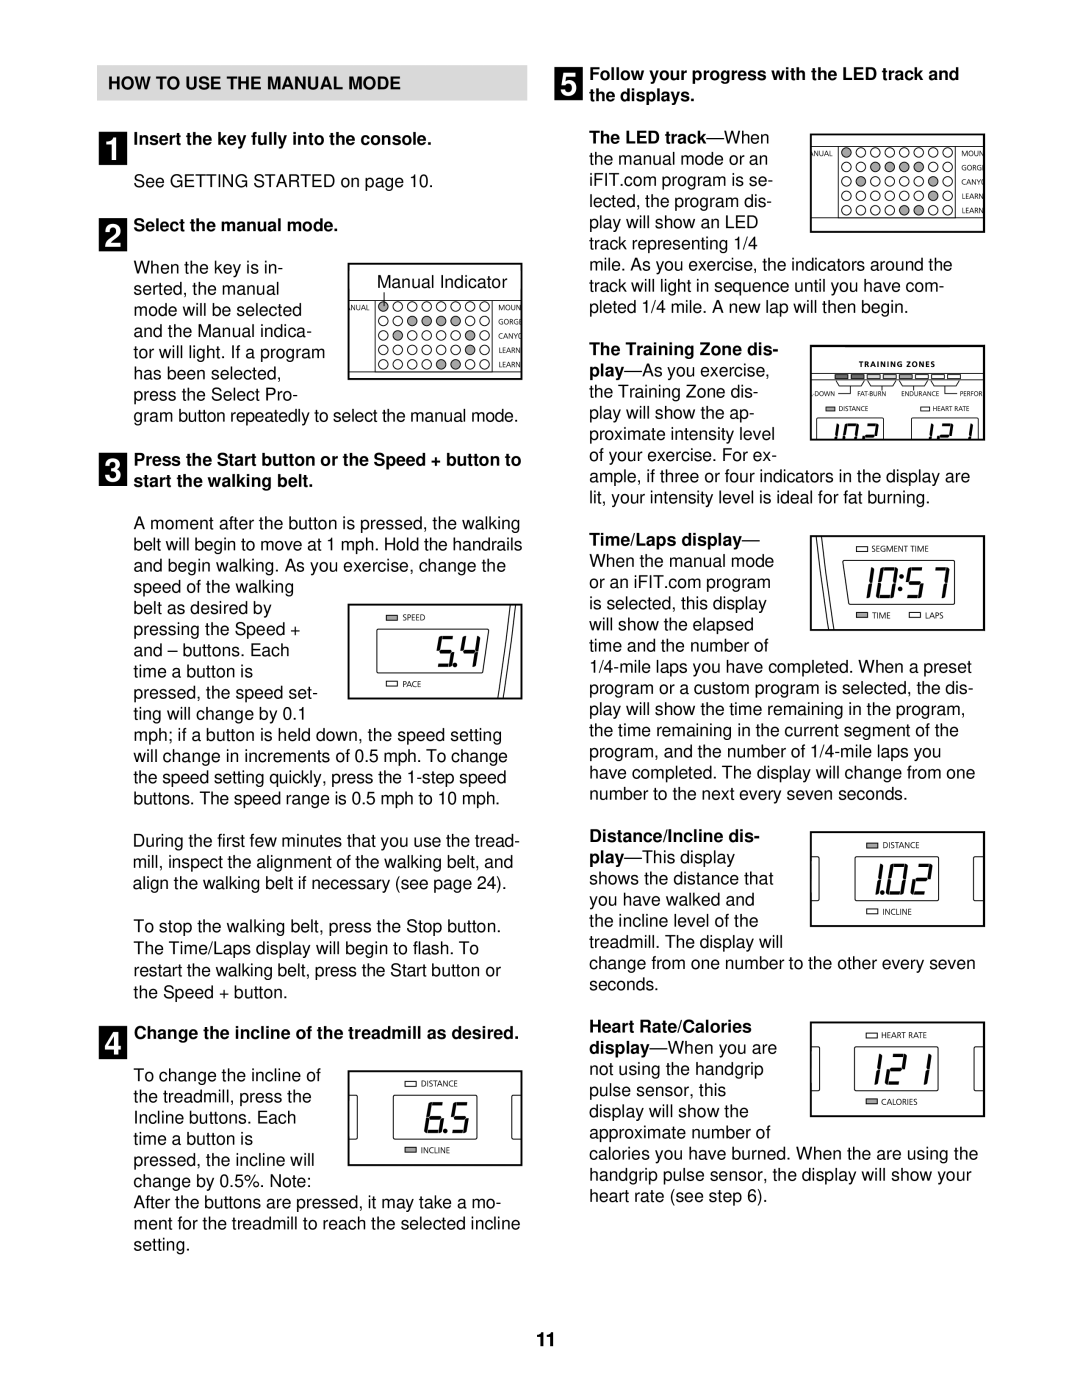 NordicTrack NTTL09610 HOW TO USE THE MANUAL MODE 1 Insert the key fully into the console, Select the manual mode 